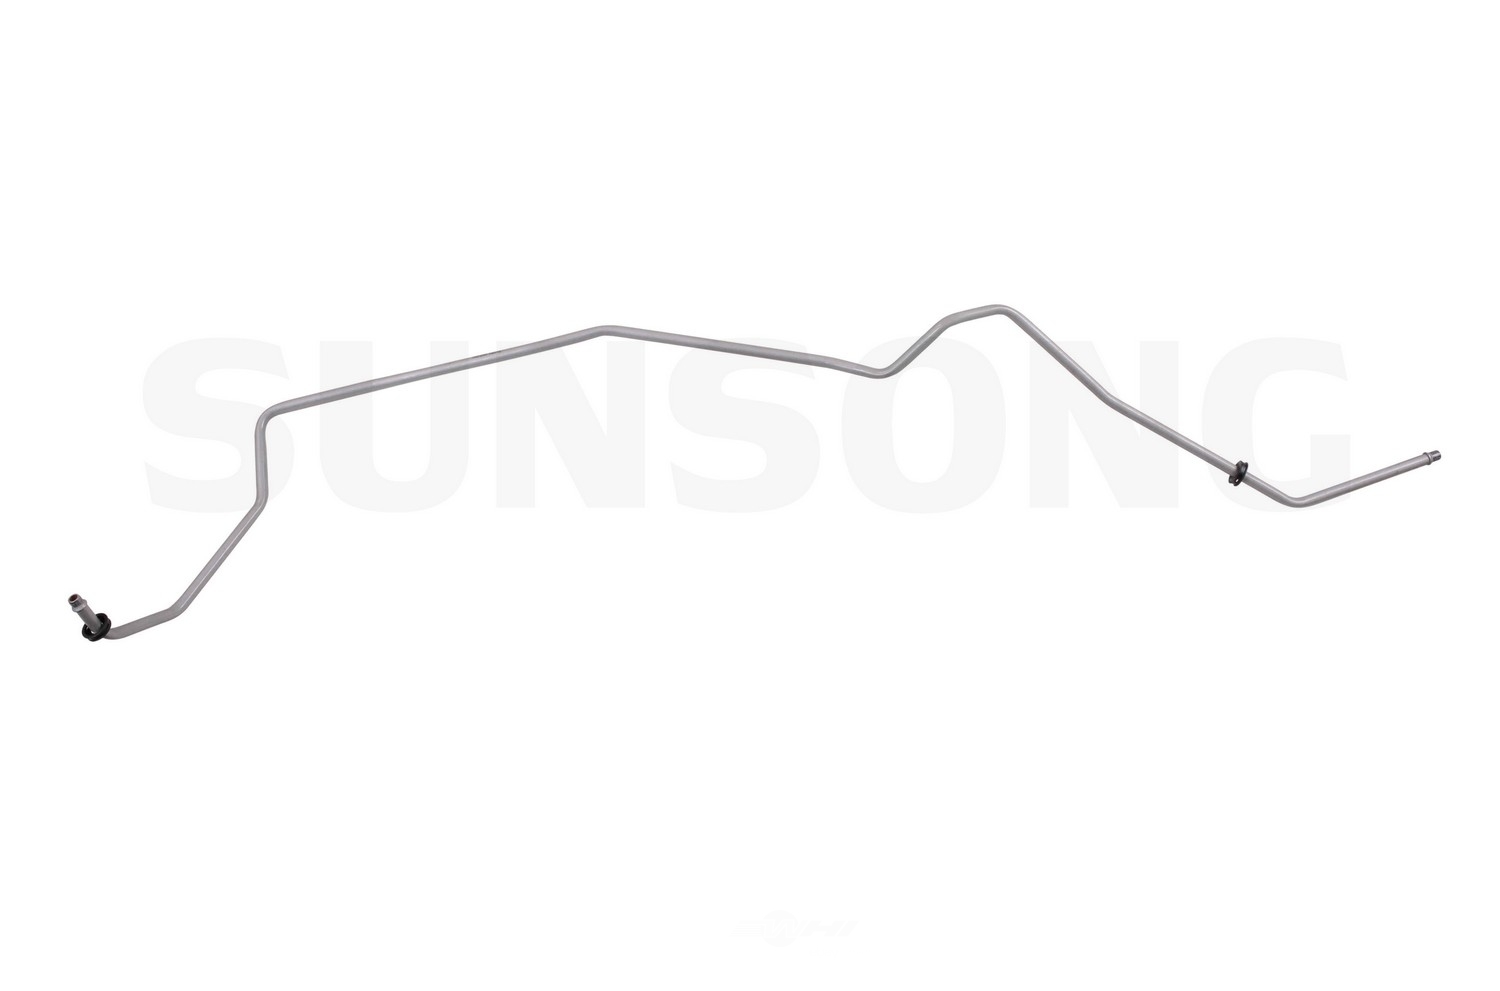 SUNSONG NORTH AMERICA - Auto Trans Oil Cooler Hose Assembly - SUG 5801243